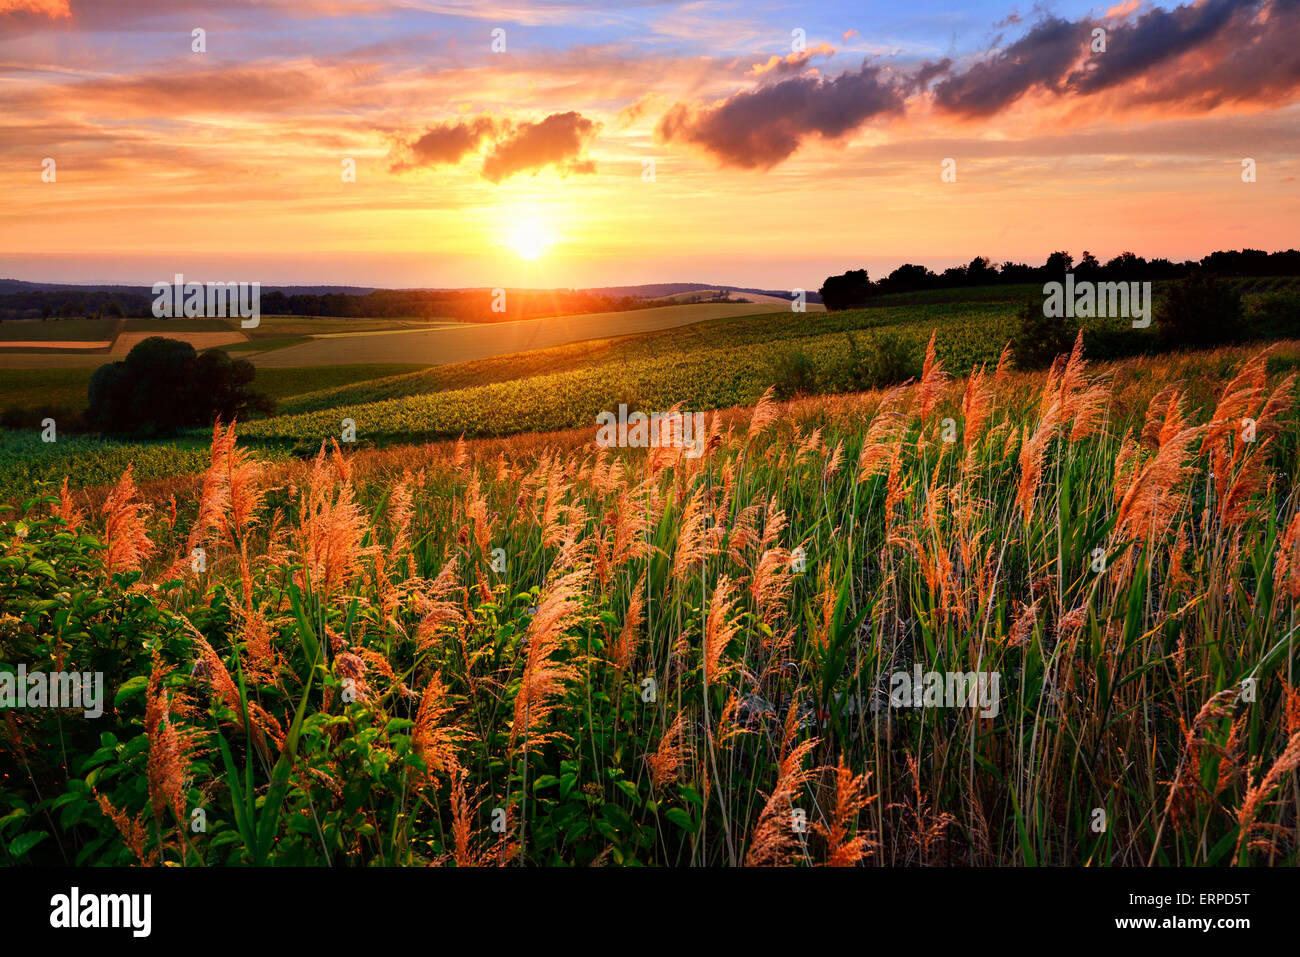 Gorgeous sunset with the sun flooding the landscape's vegetation in red and warm colors, vibrant sky and rural hills Stock Photo